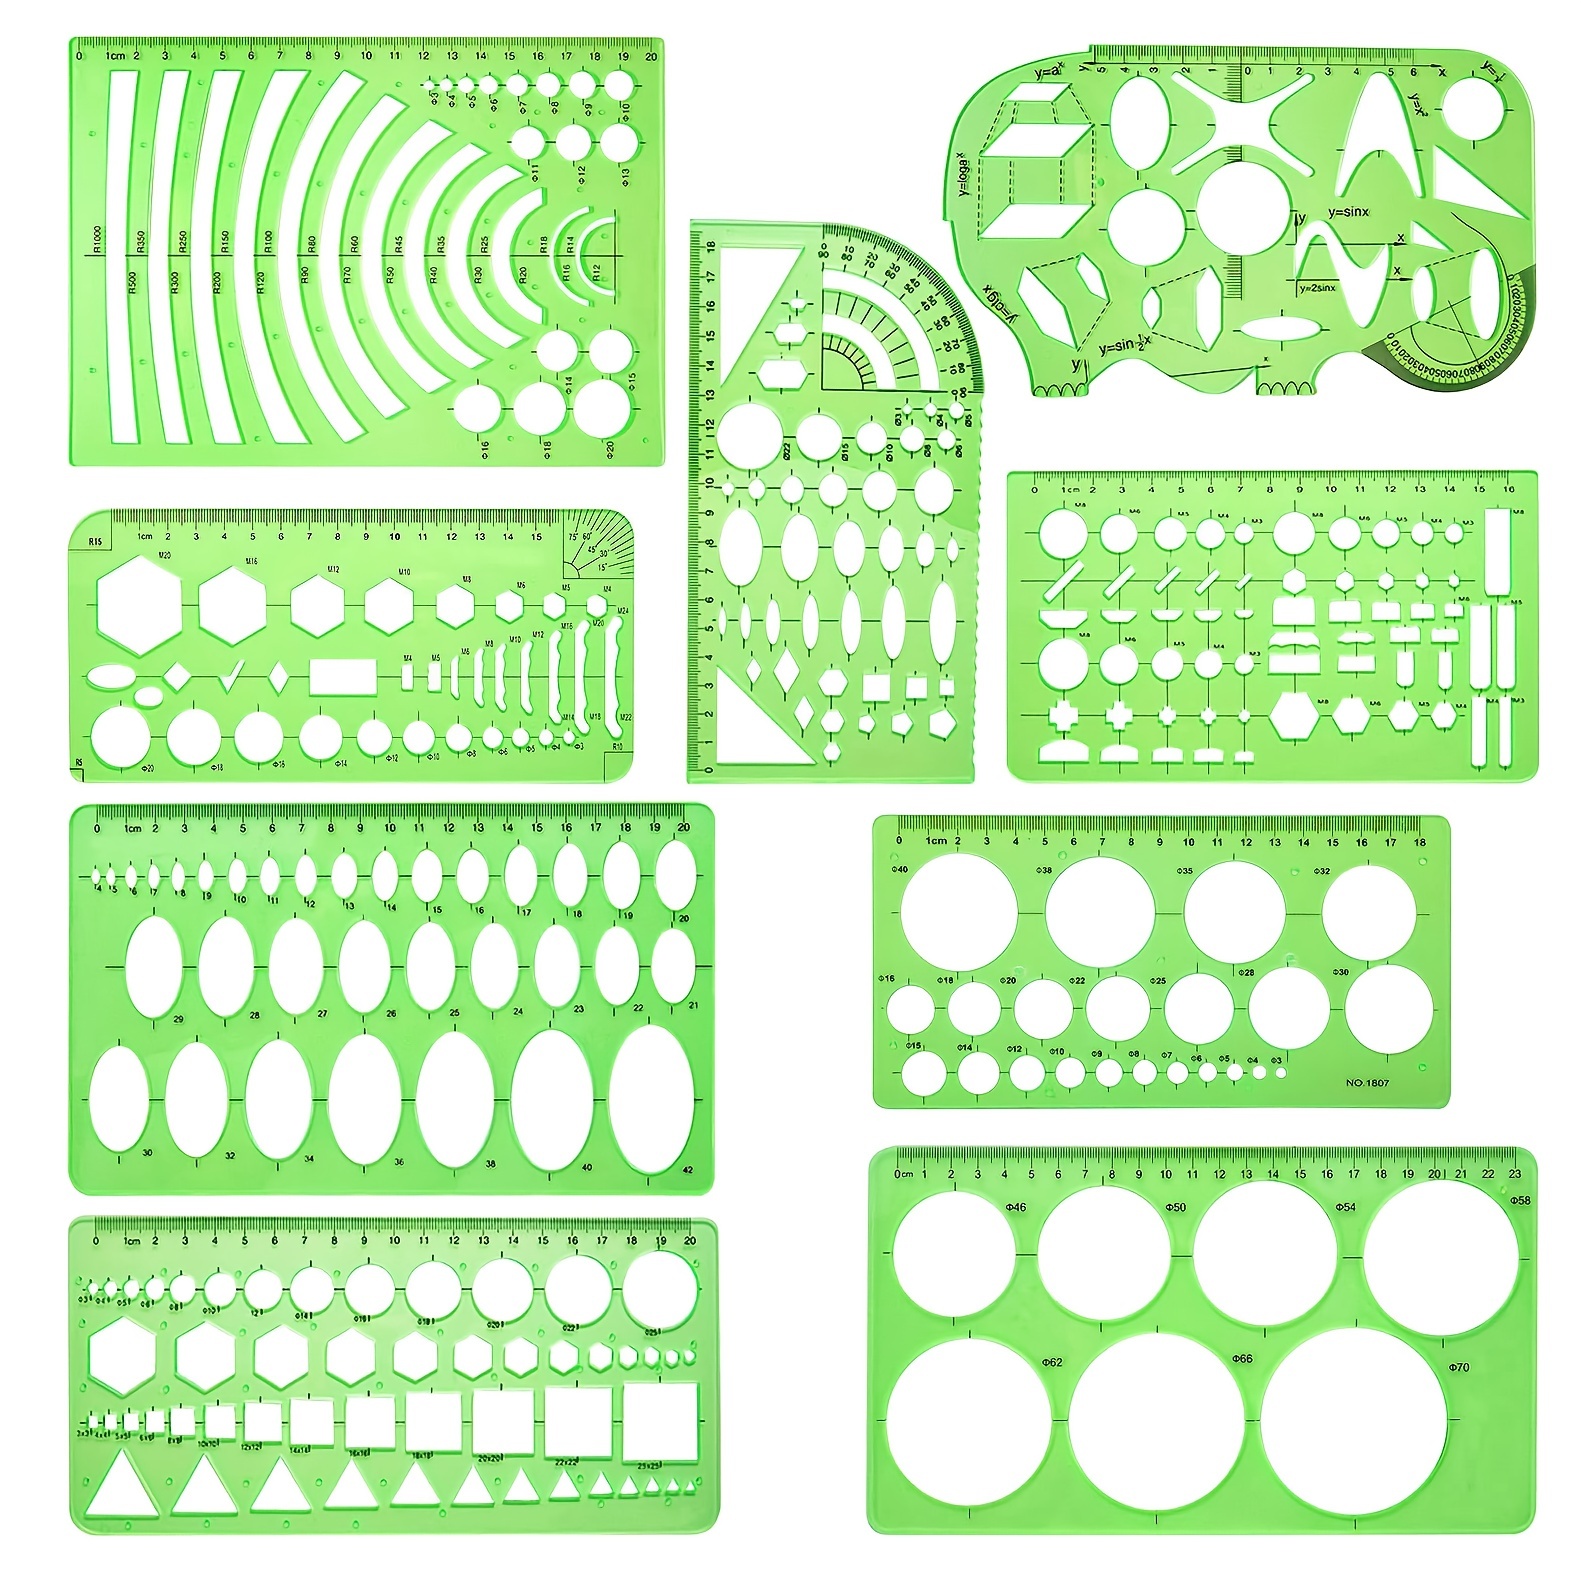 Clear Green Plastic Hollow Out Drawing Circle Template Ruler